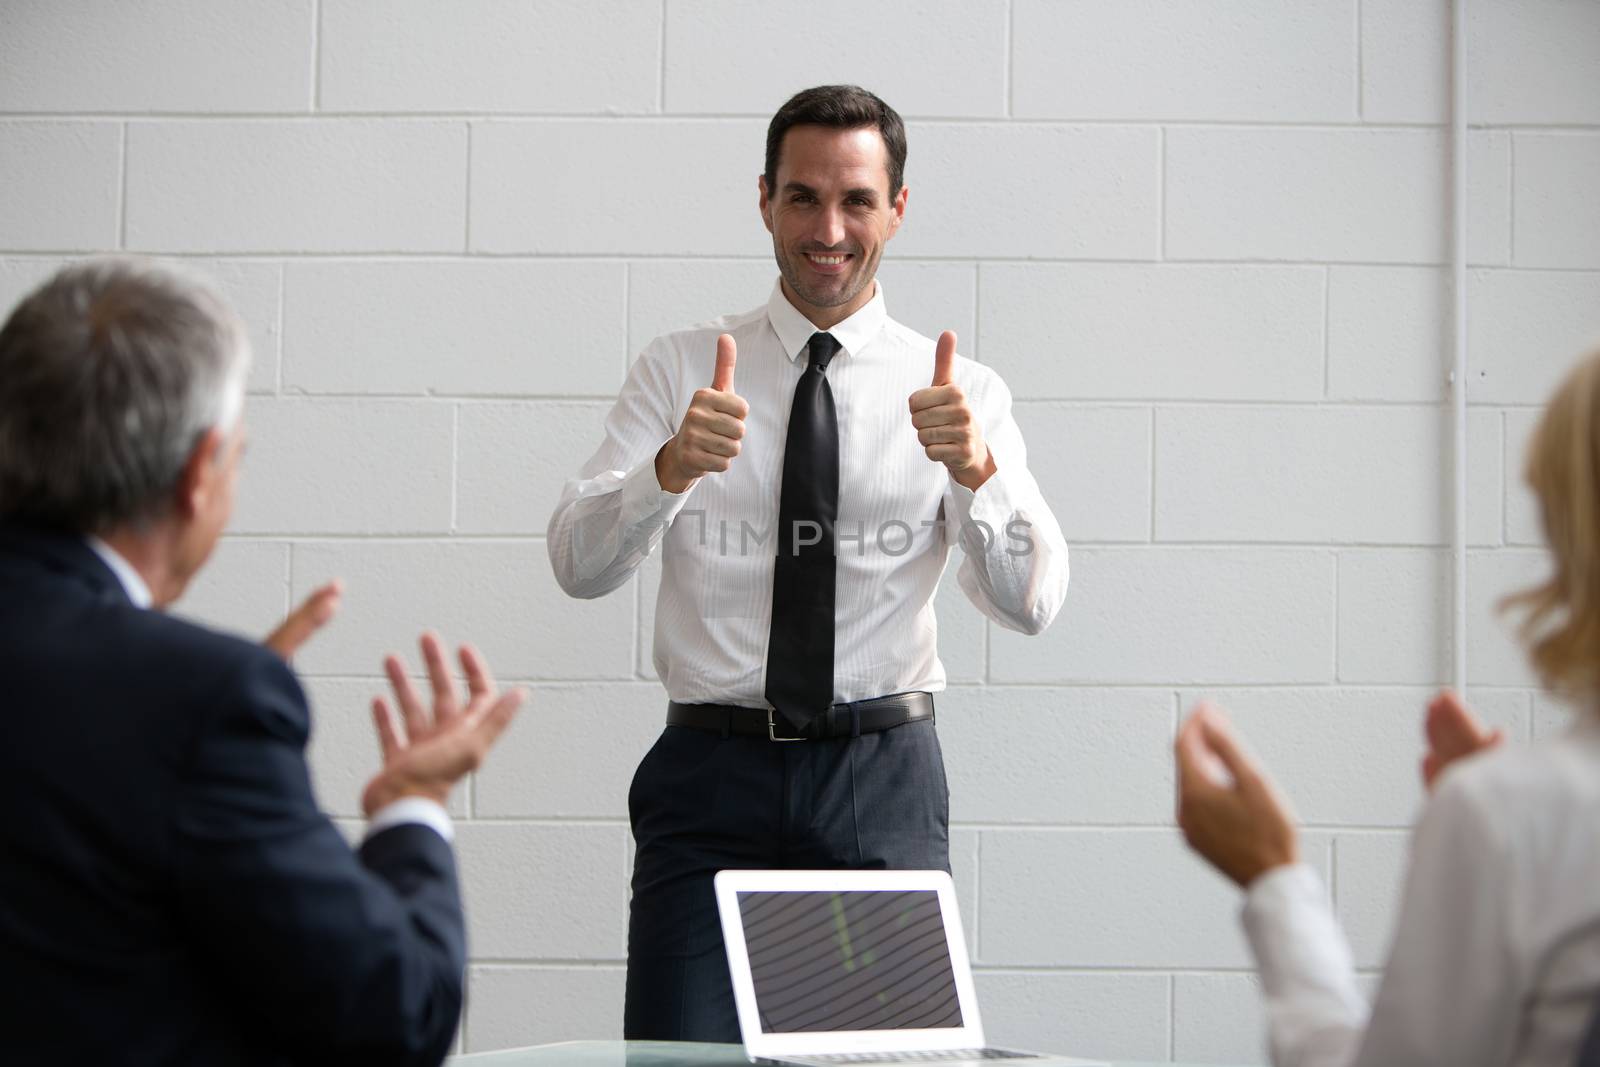 Three businesspeople during a meeting, clapping hands at the end of a successful presentation